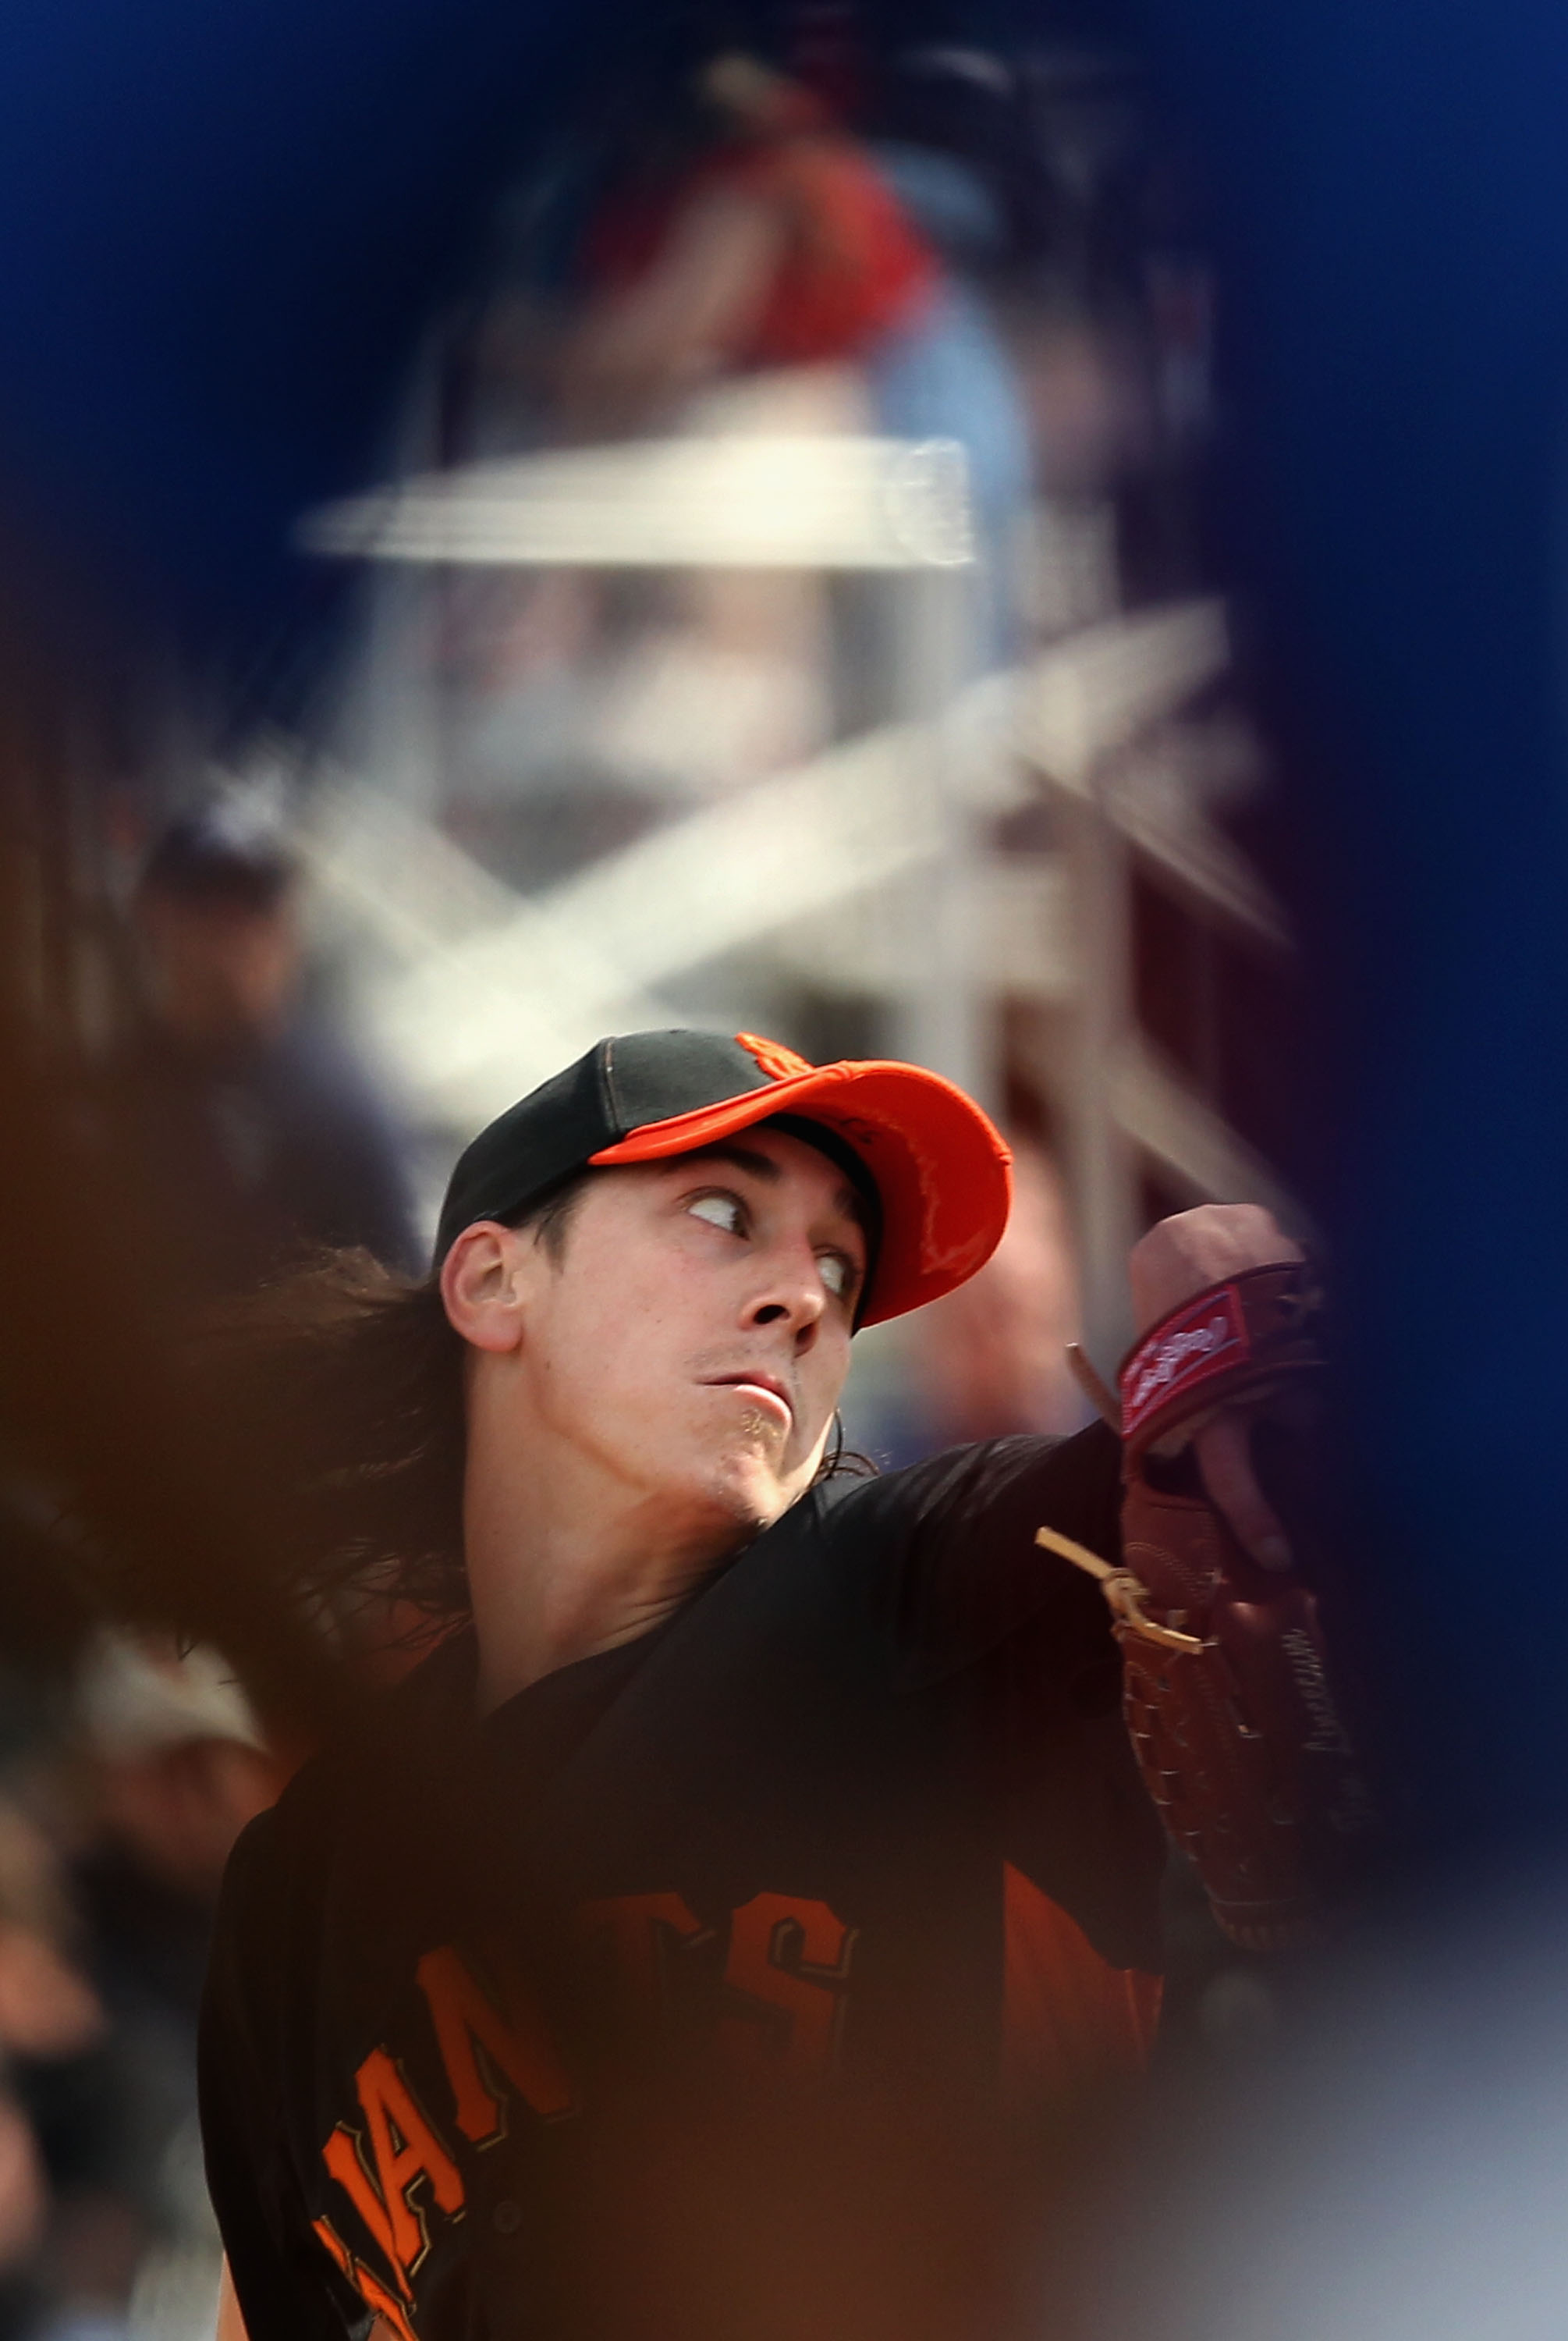 Giants sign Tim Lincecum to two-year, $35 million deal - MLB Daily Dish